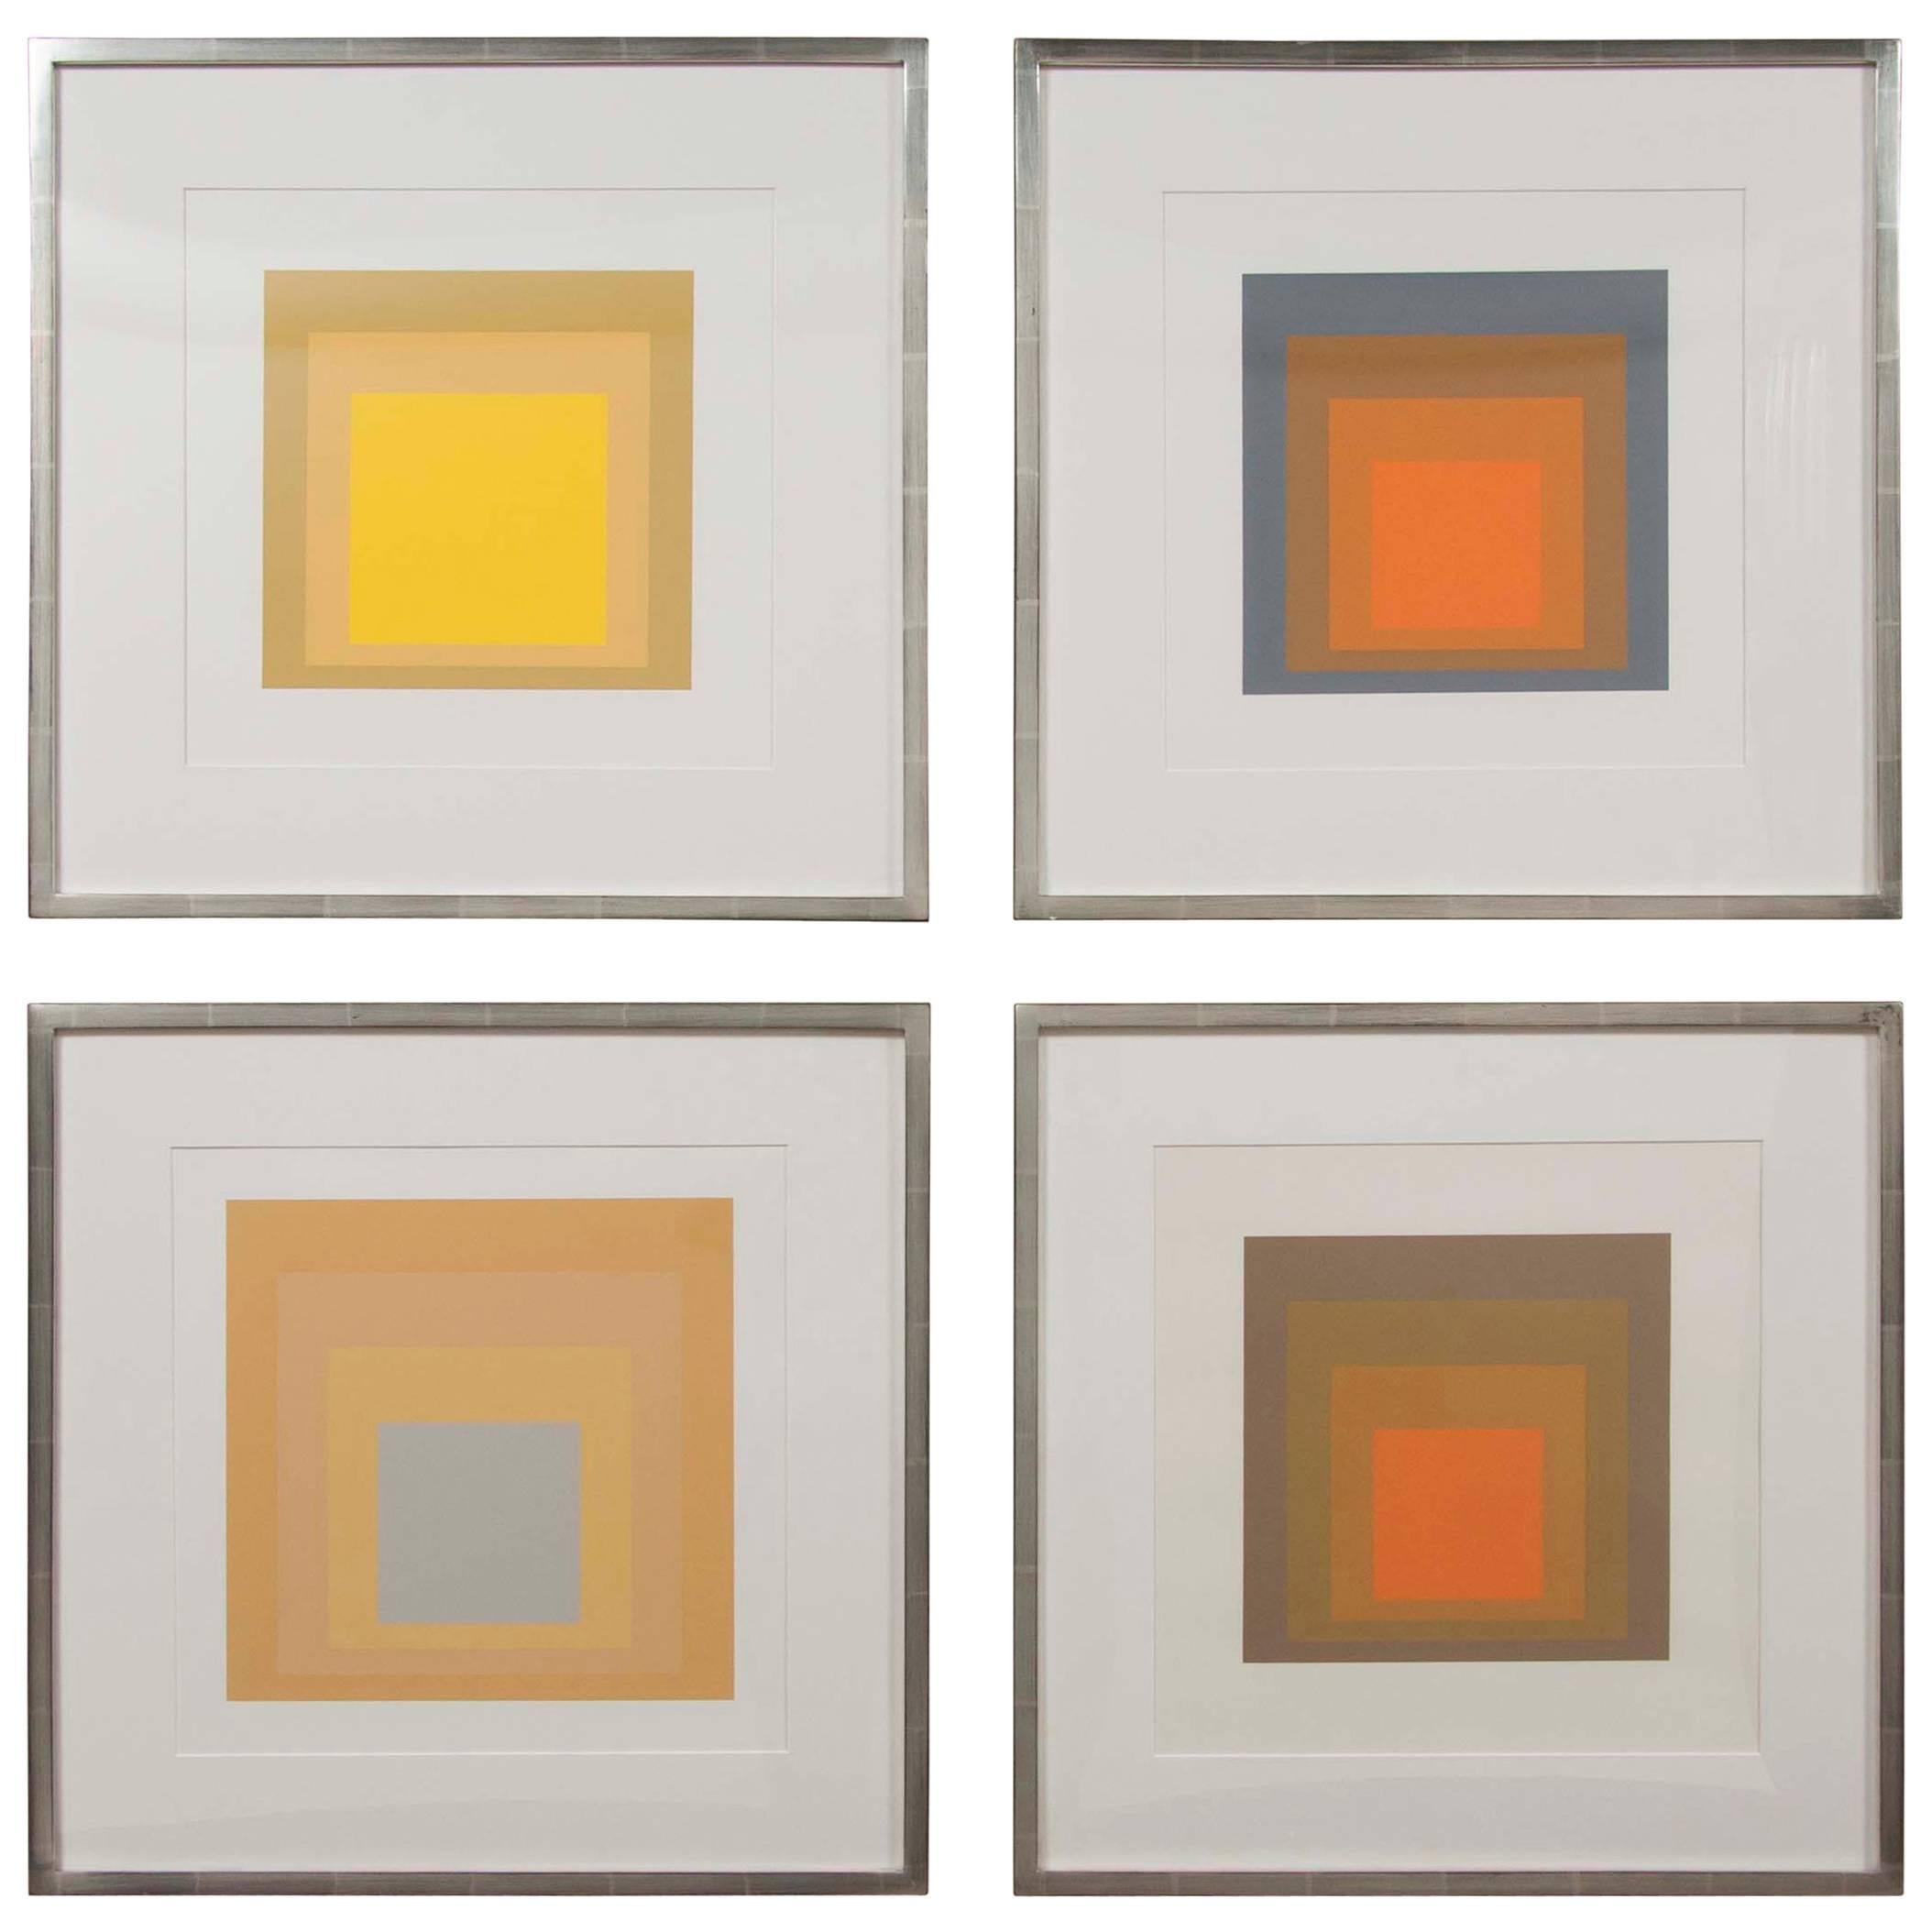 Josef Albers Homage to the Square from Formations: Articulation, 1972 Portfolio